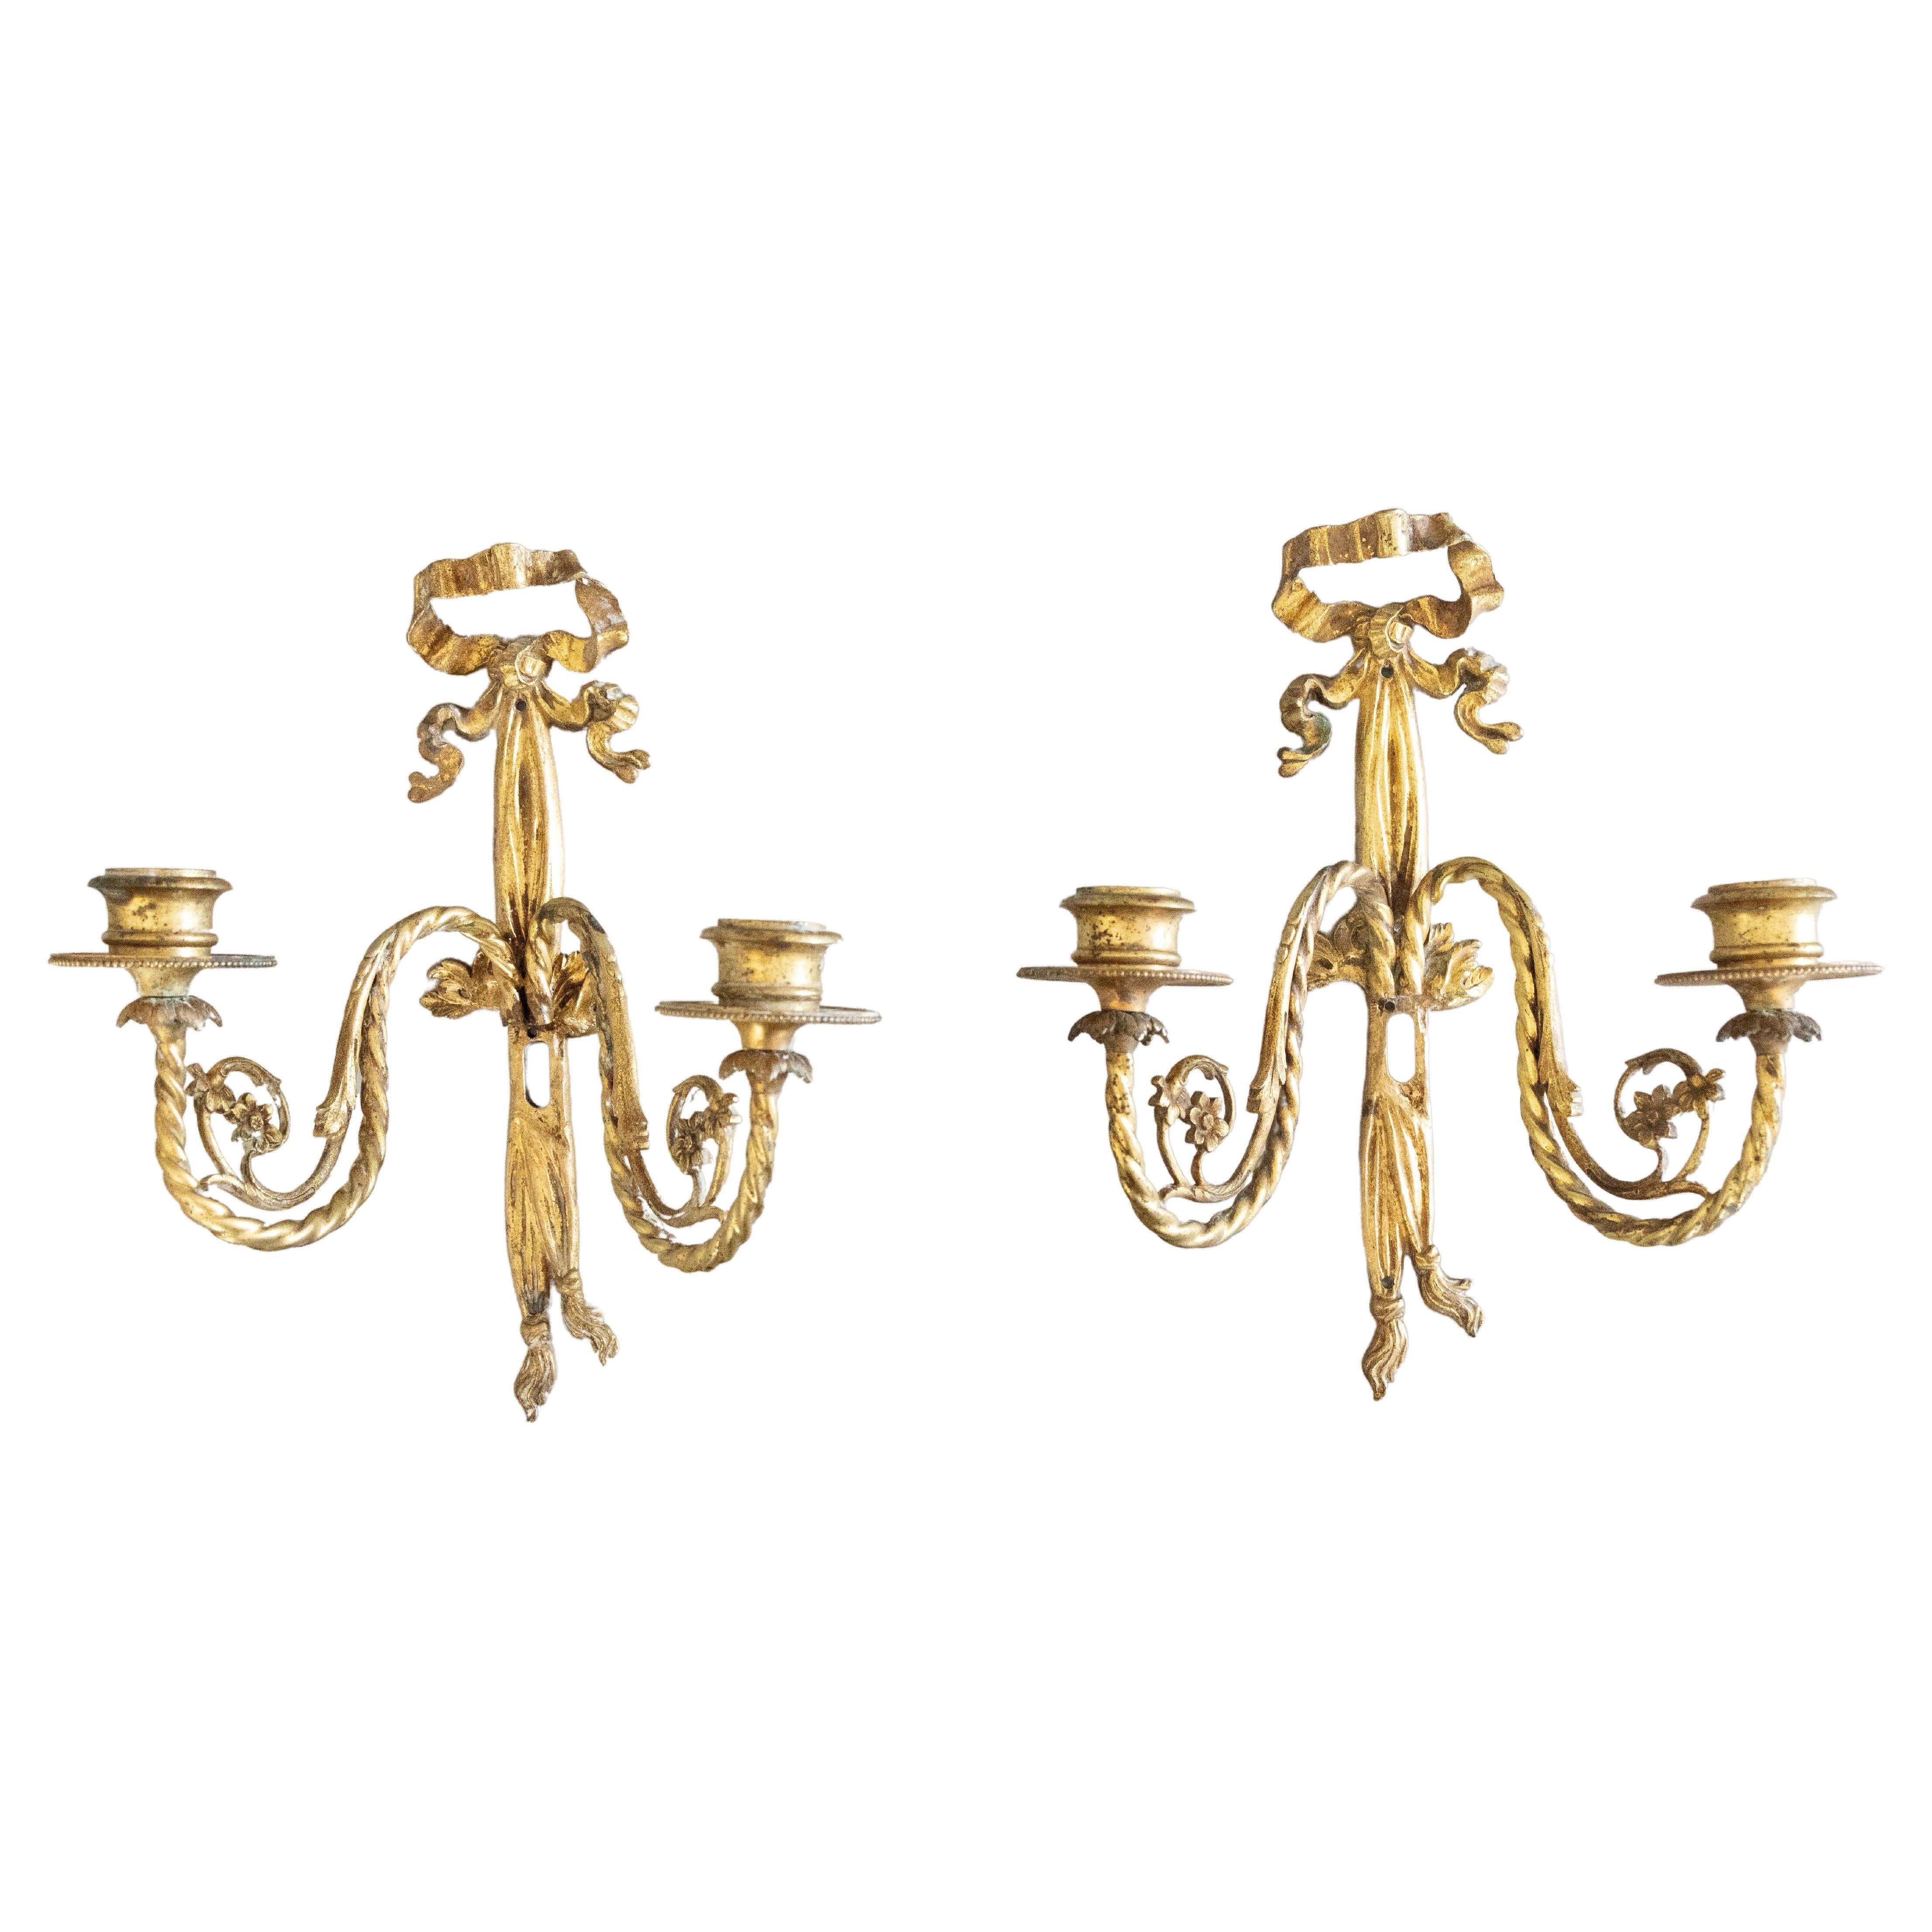 Pair of Antique French Louis XVI Style Gilded Bronze Bow & Ribbon Candle Sconces For Sale